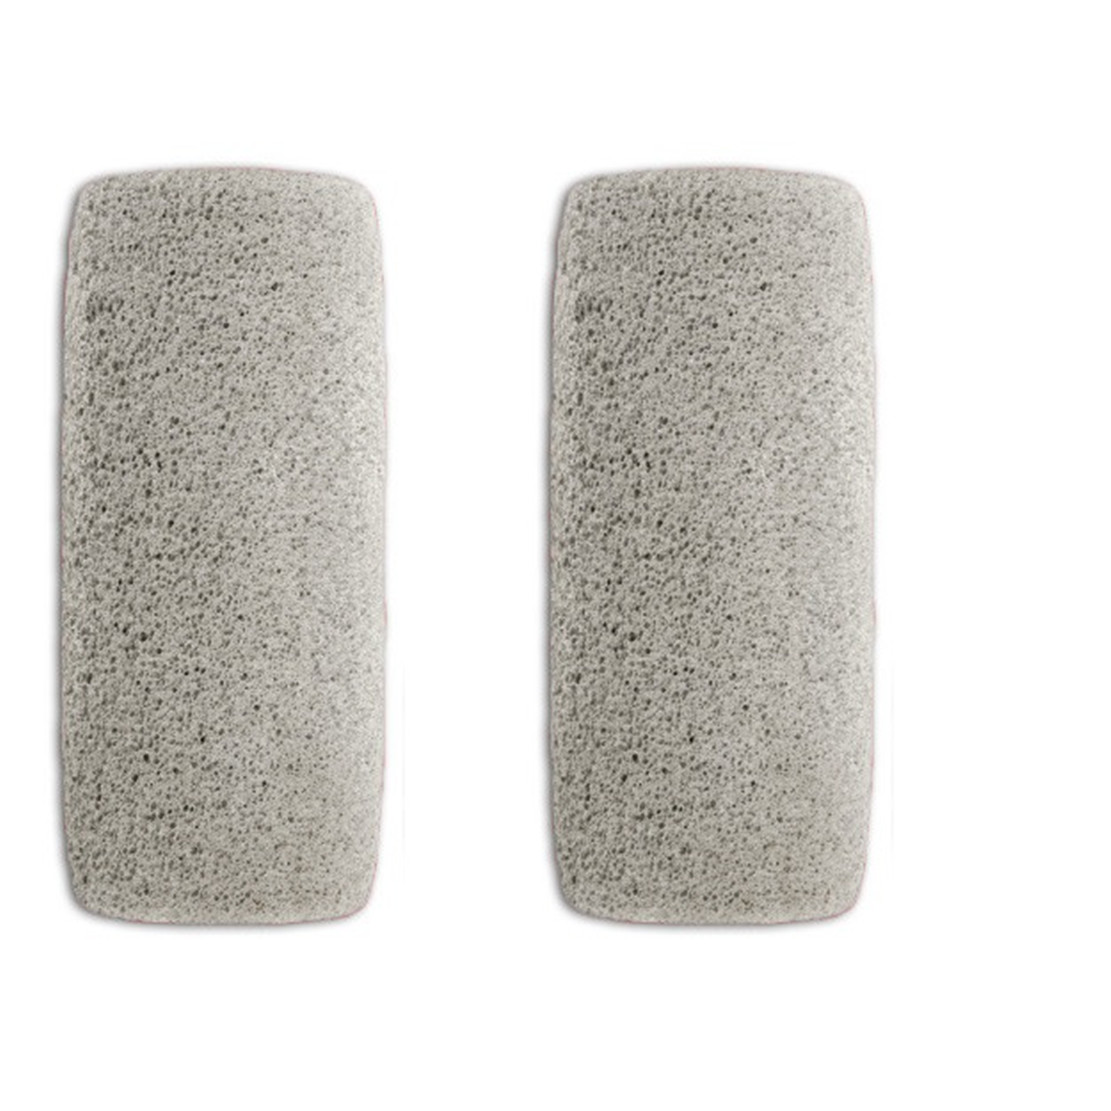 Pet hair removal pumice stone - 副本